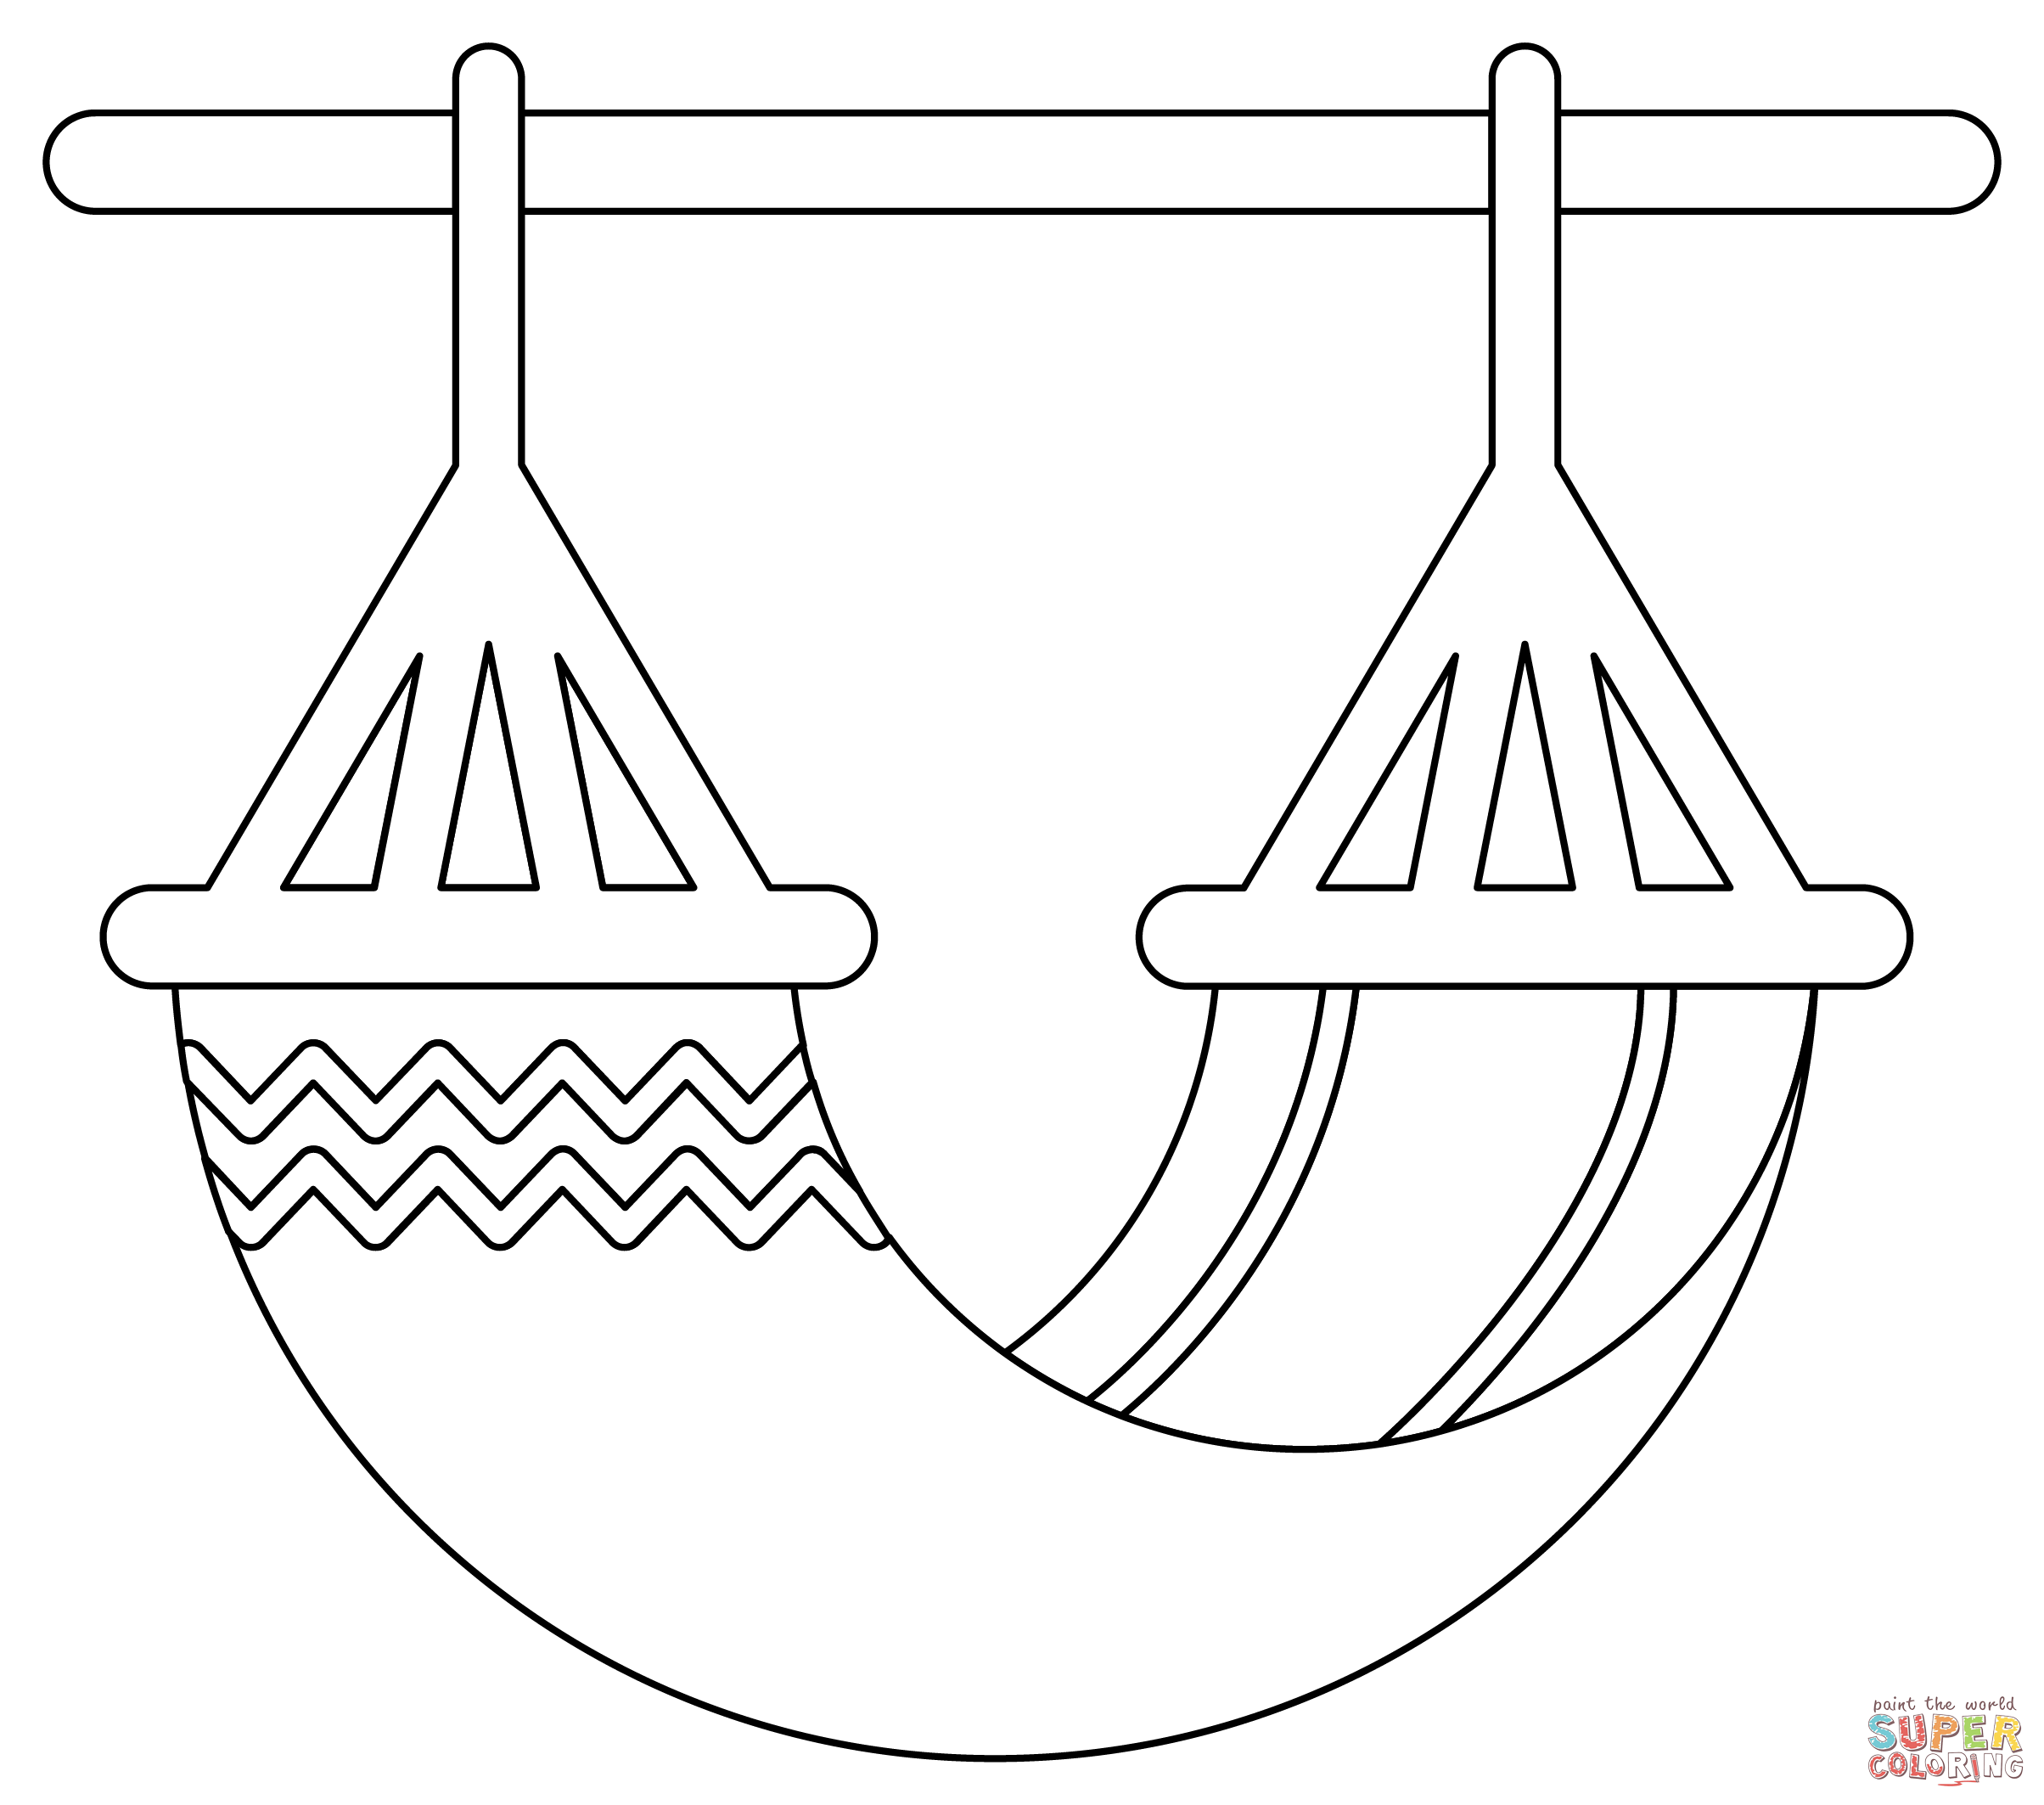 Hammock coloring page free printable coloring pages